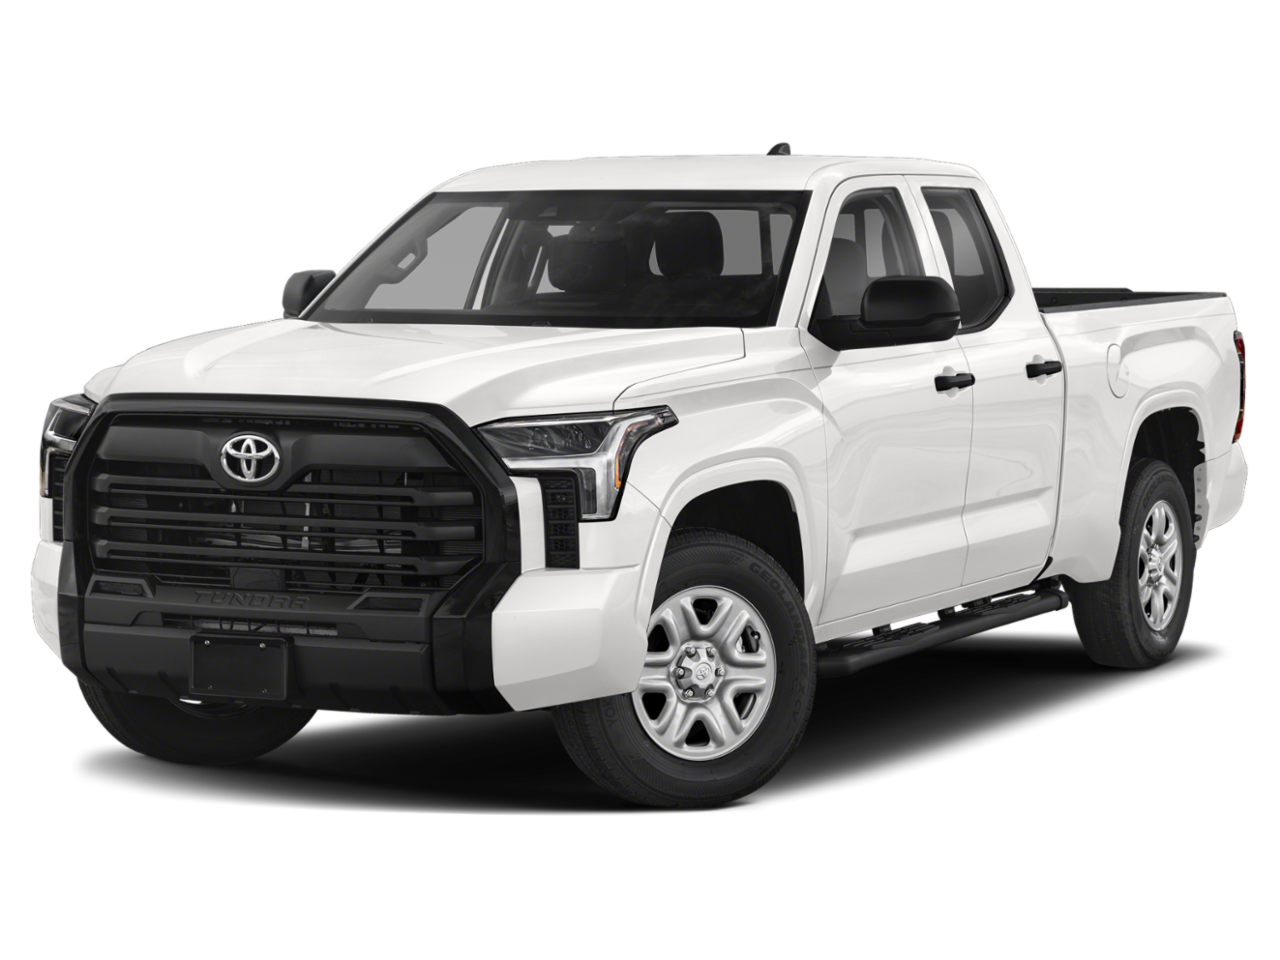 New Toyota Tundra 2WD from your Houlton, ME dealership, York's of Houlton.